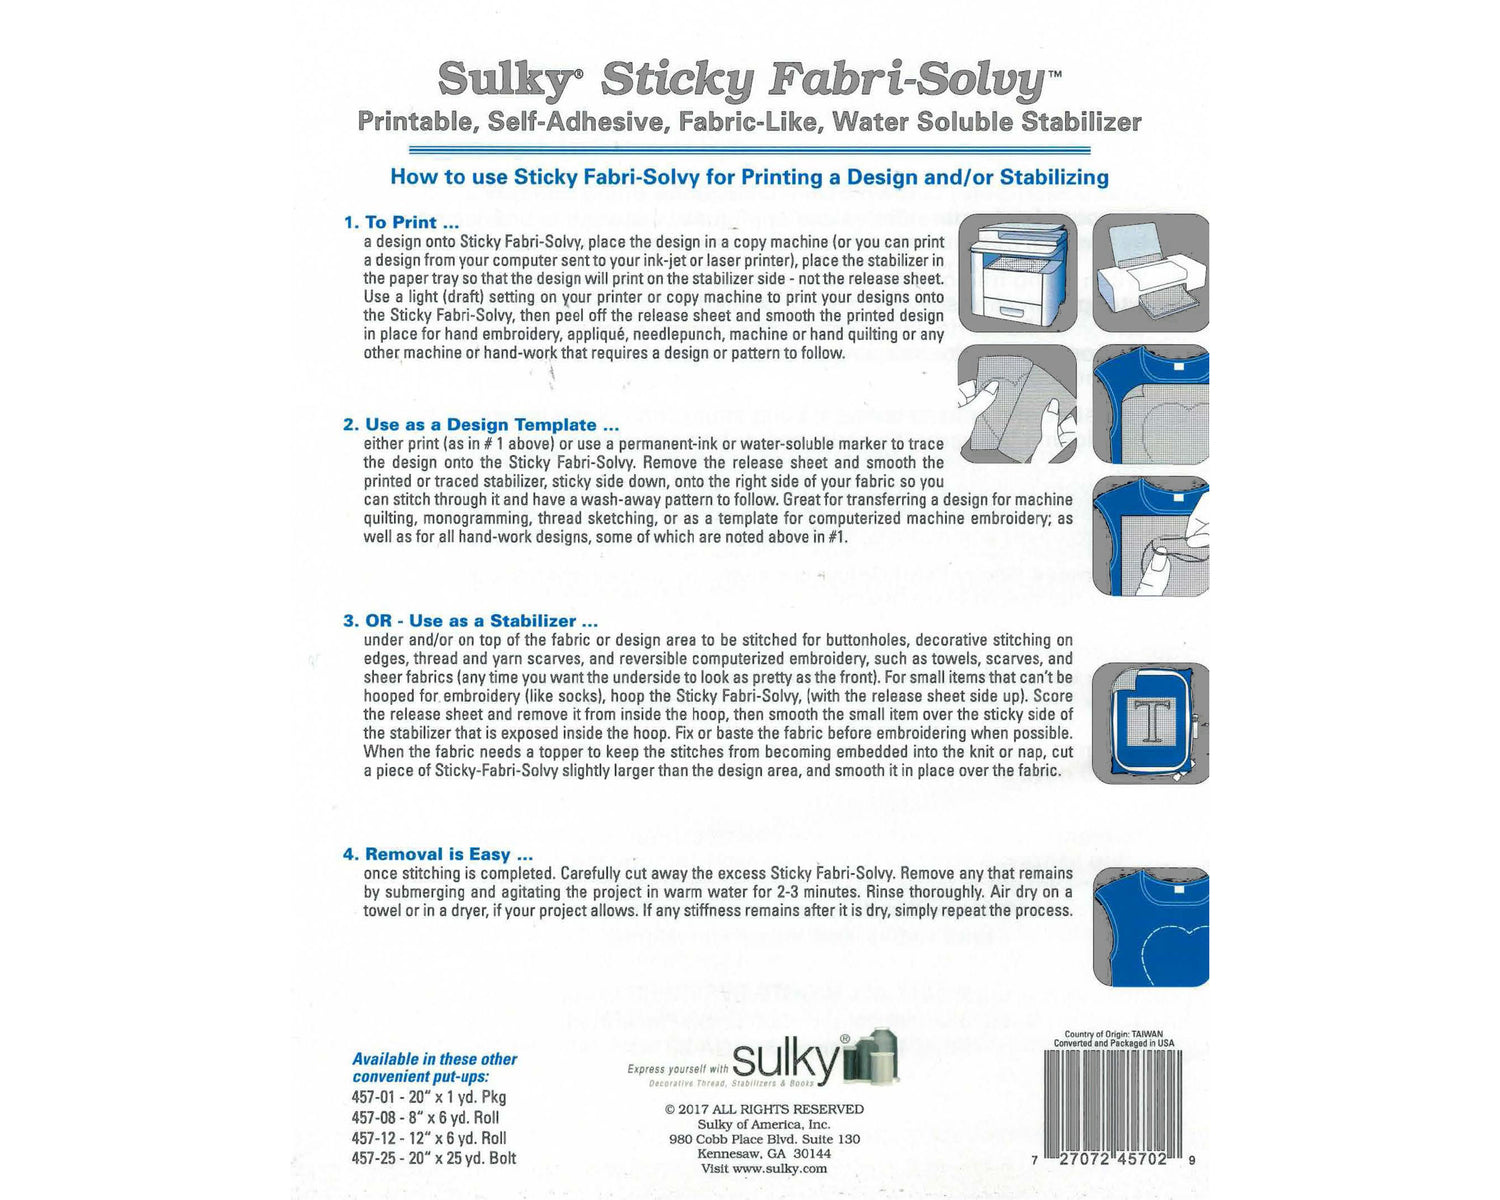 Sulky Sticky Fabri-solvy Water Soluble Stabilizer, Embroidery